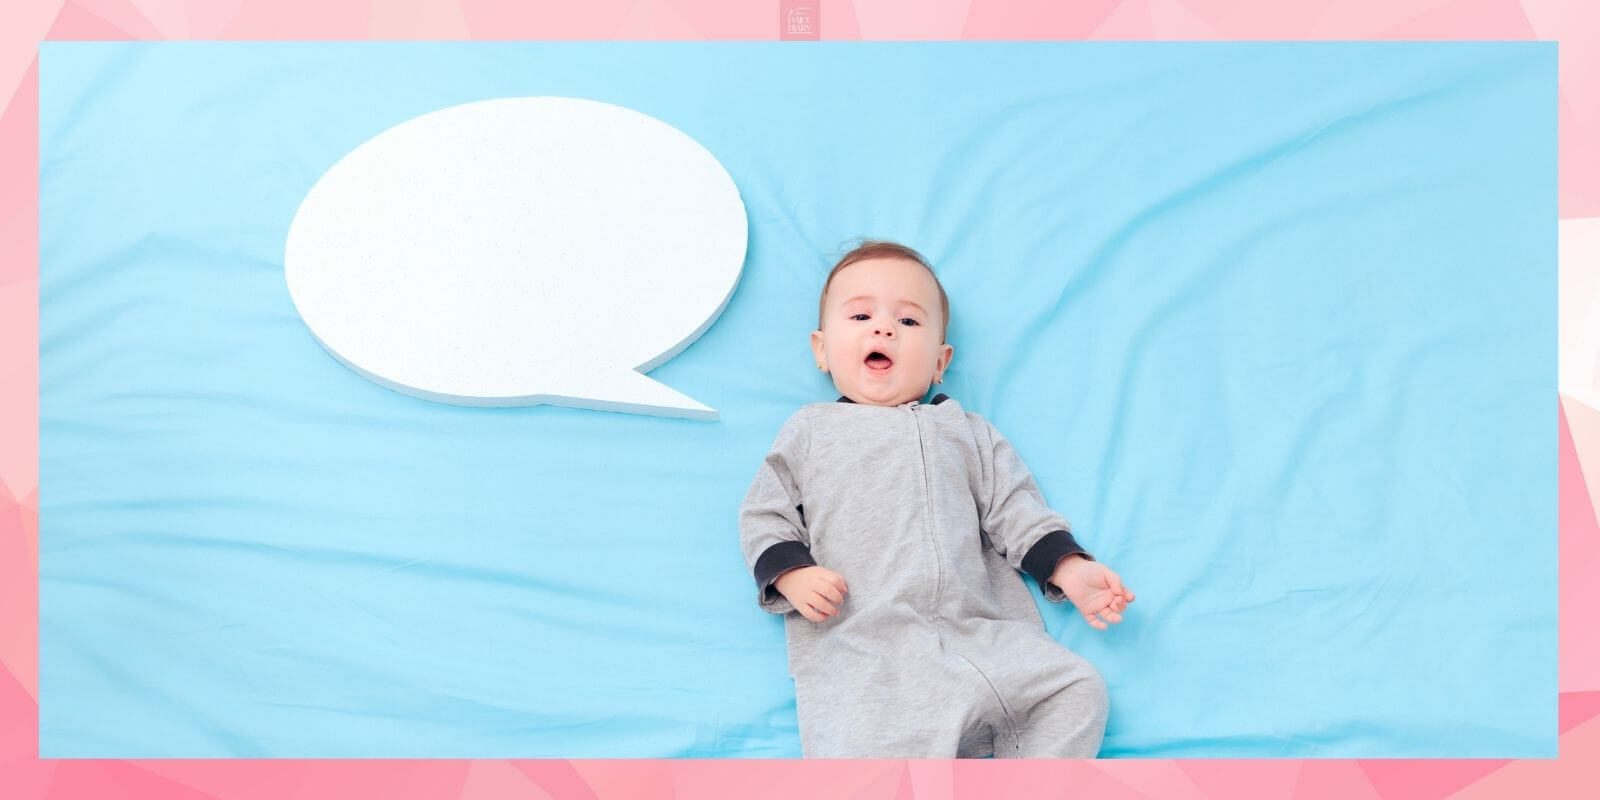 11 month-old baby with a speech bubble.